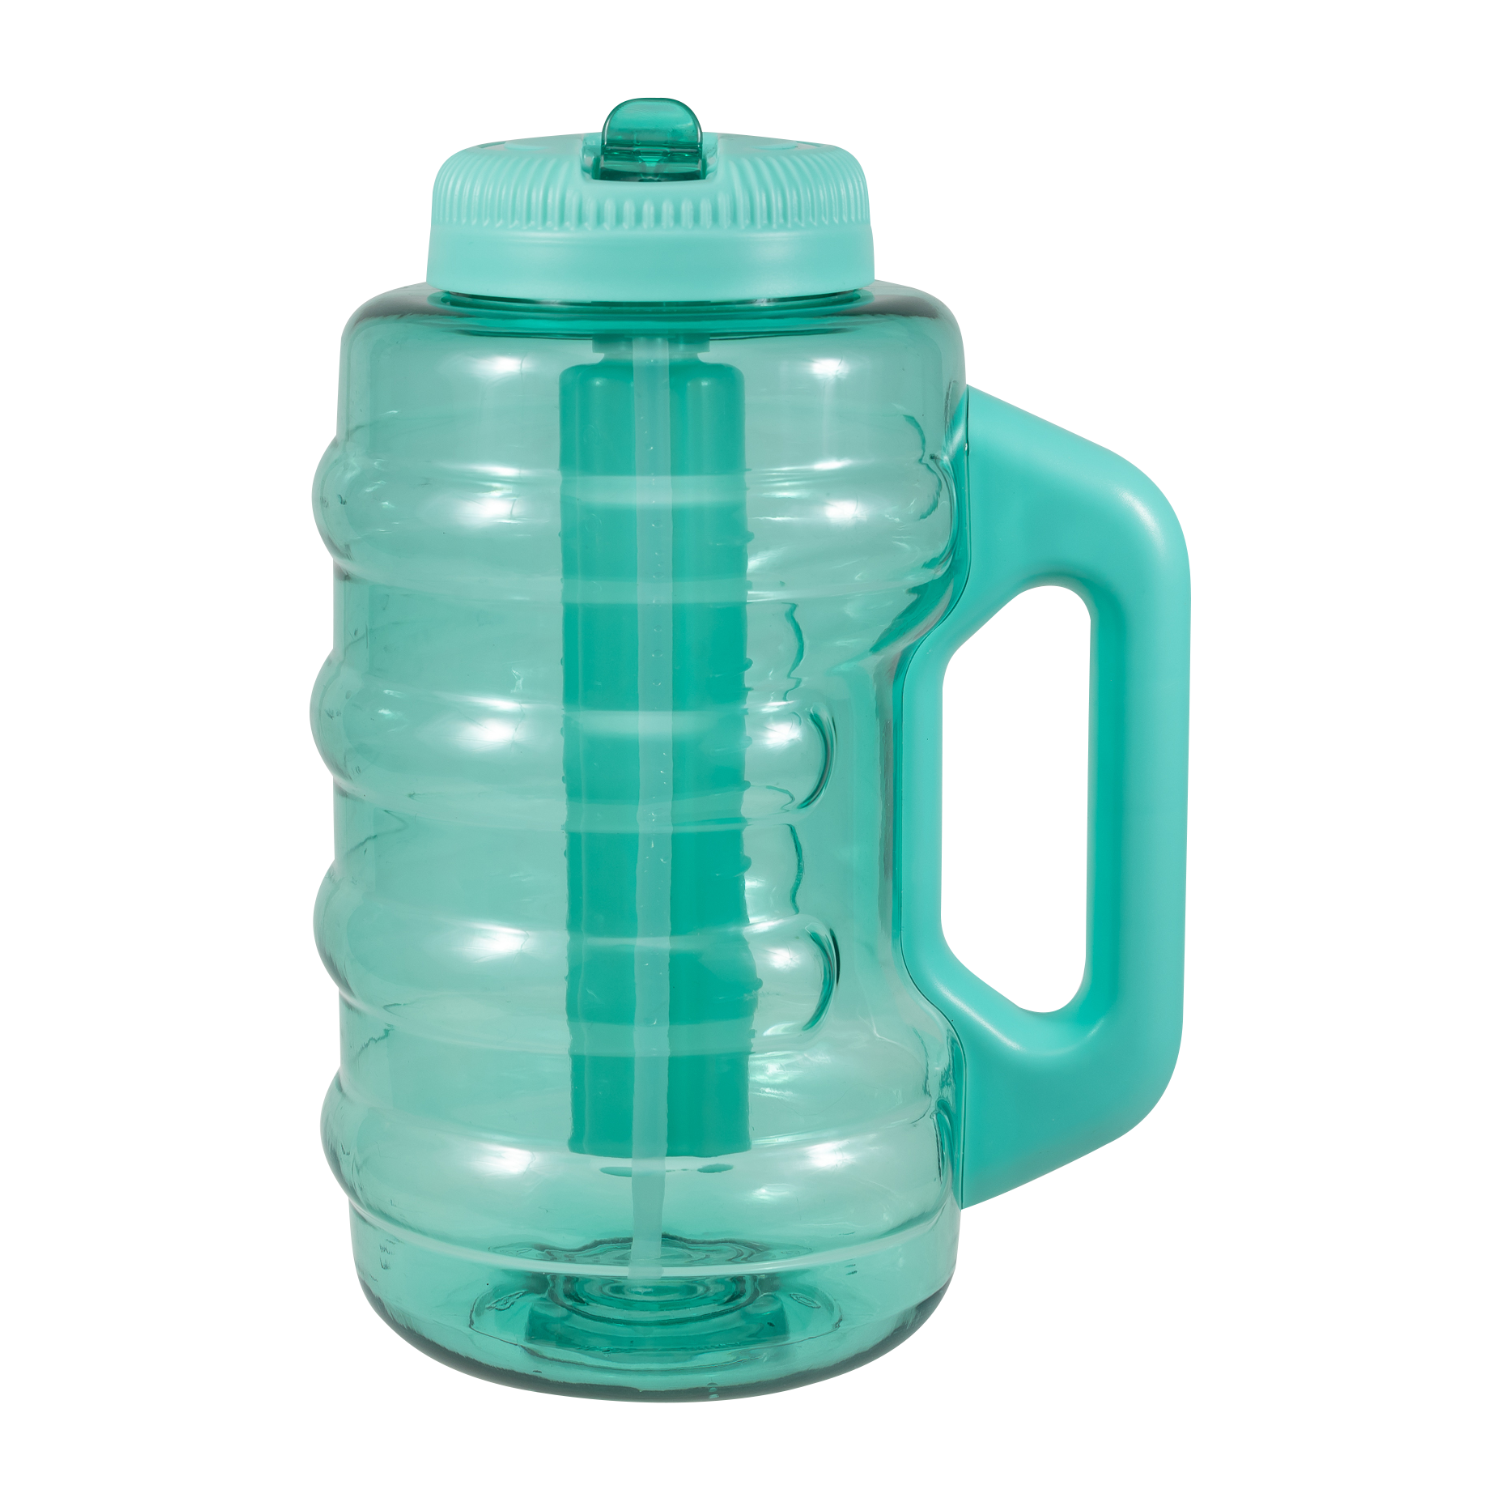 Eco-Friendly Silicone Dog Travel Water Bottle - Green 16 oz